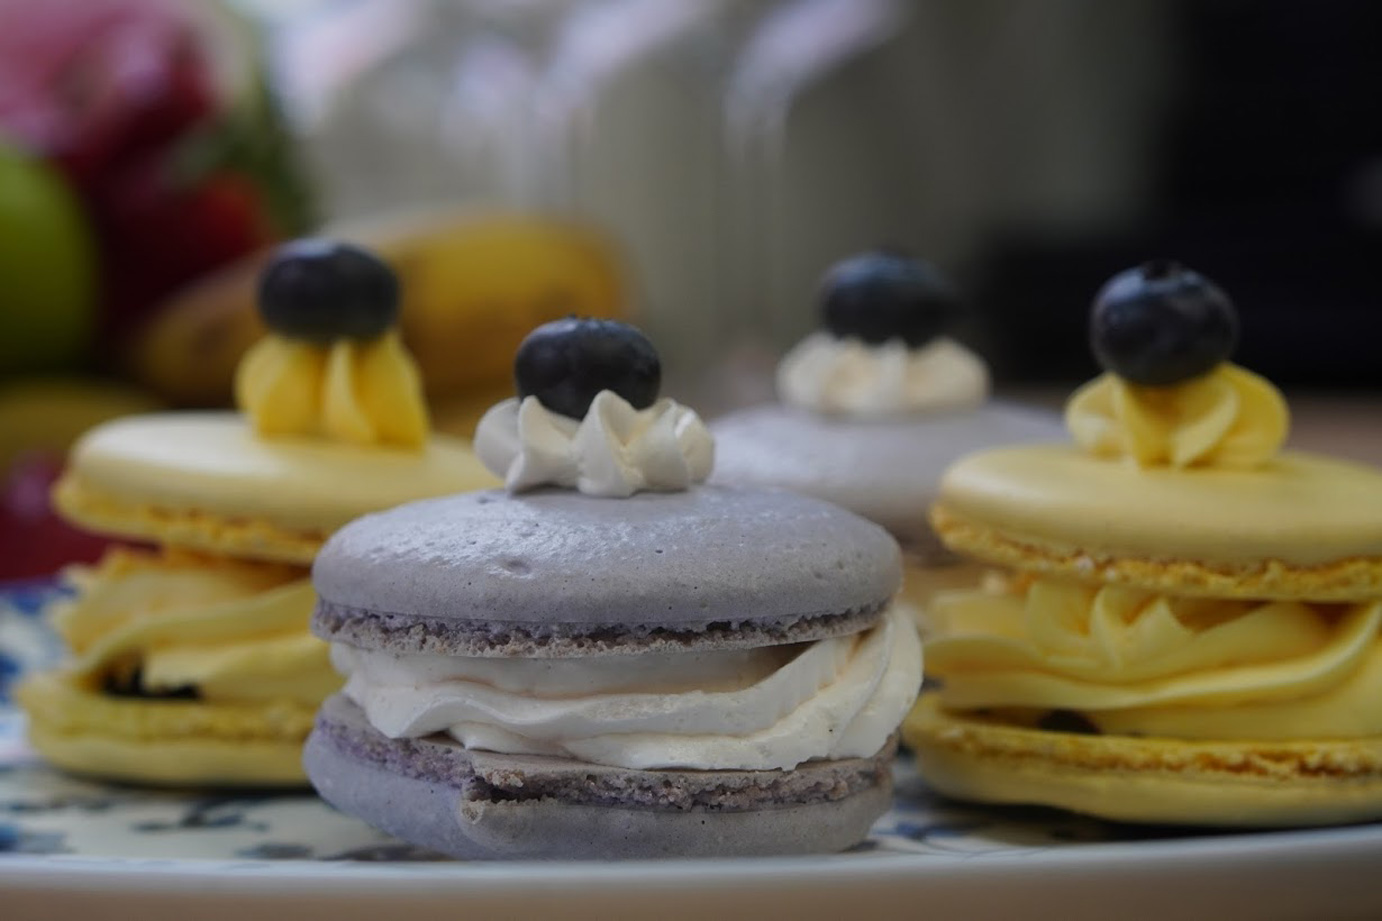 French macarons with different kinds of fillings